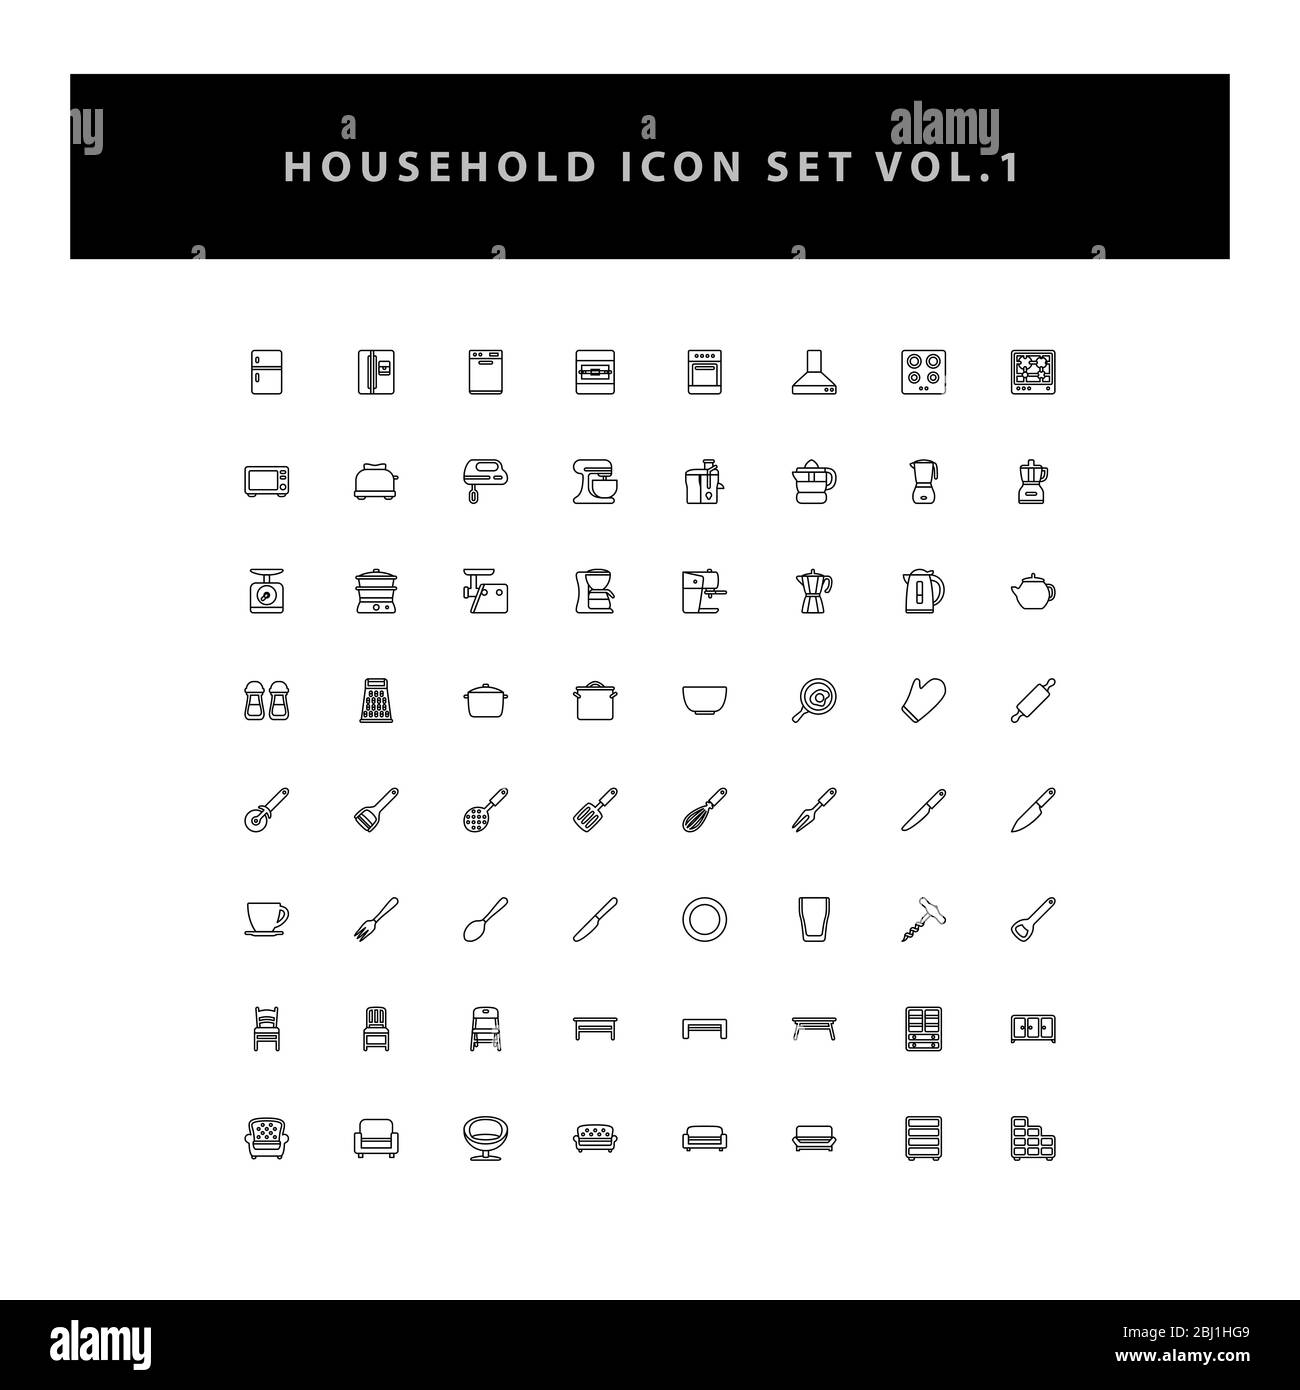 household appliances vector icons set vol 1 with outline design Stock Vector